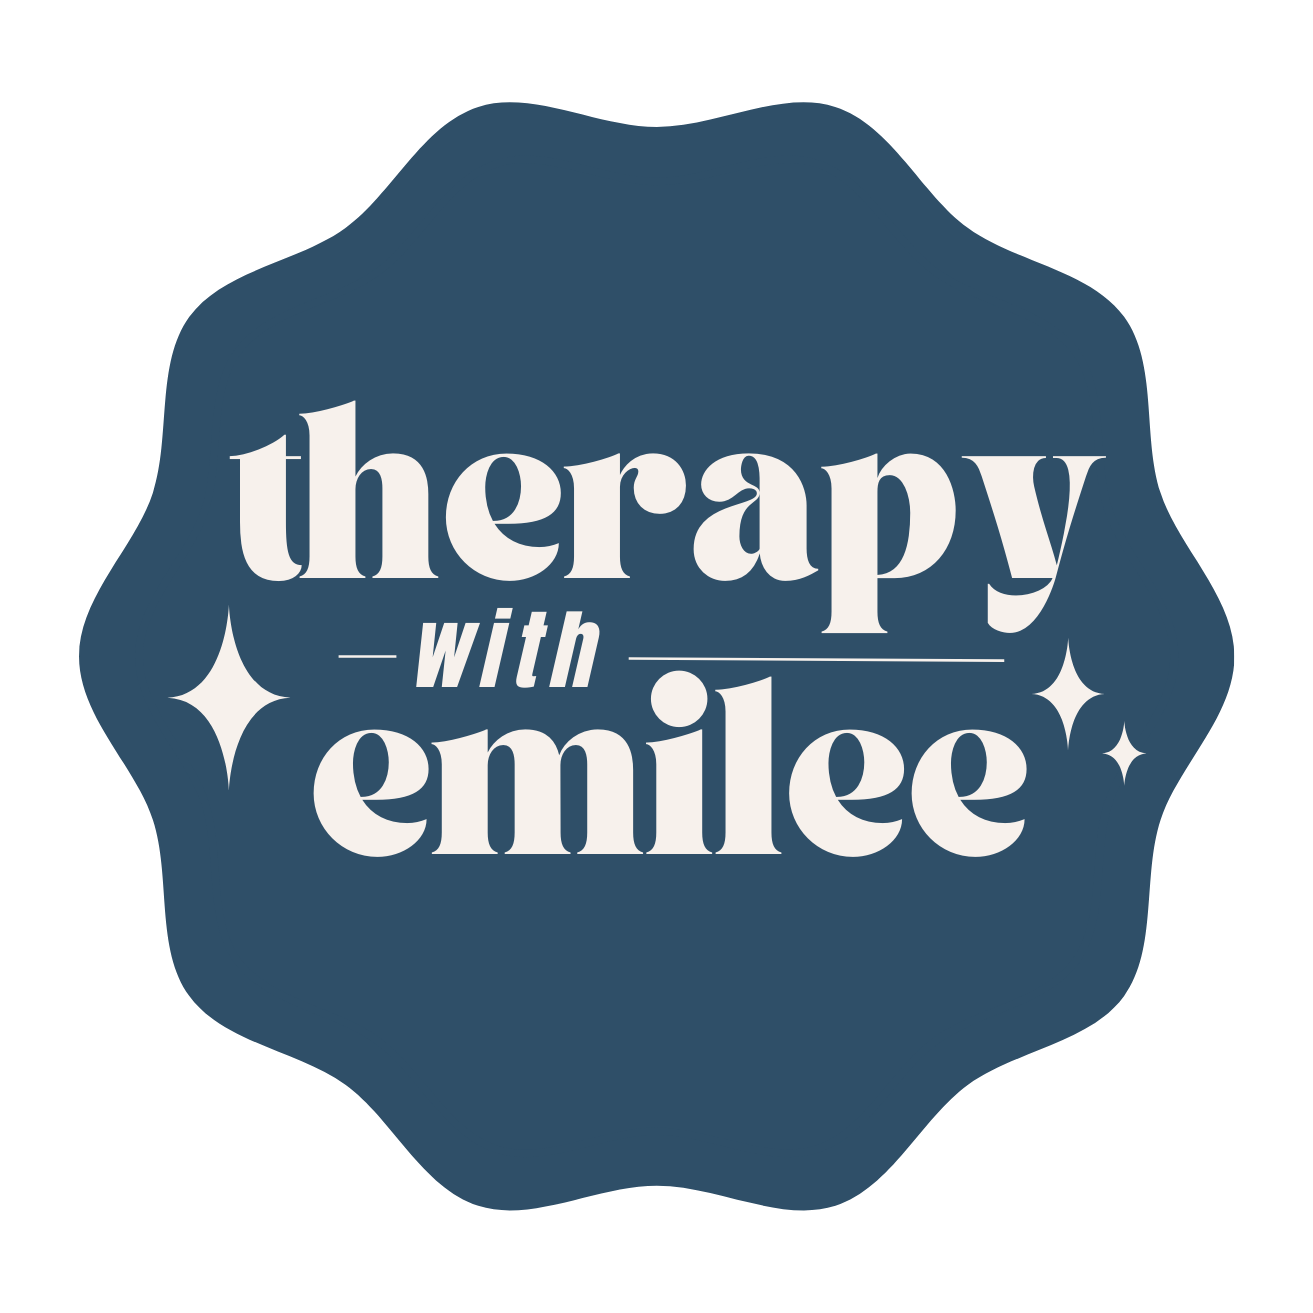 therapy with emilee